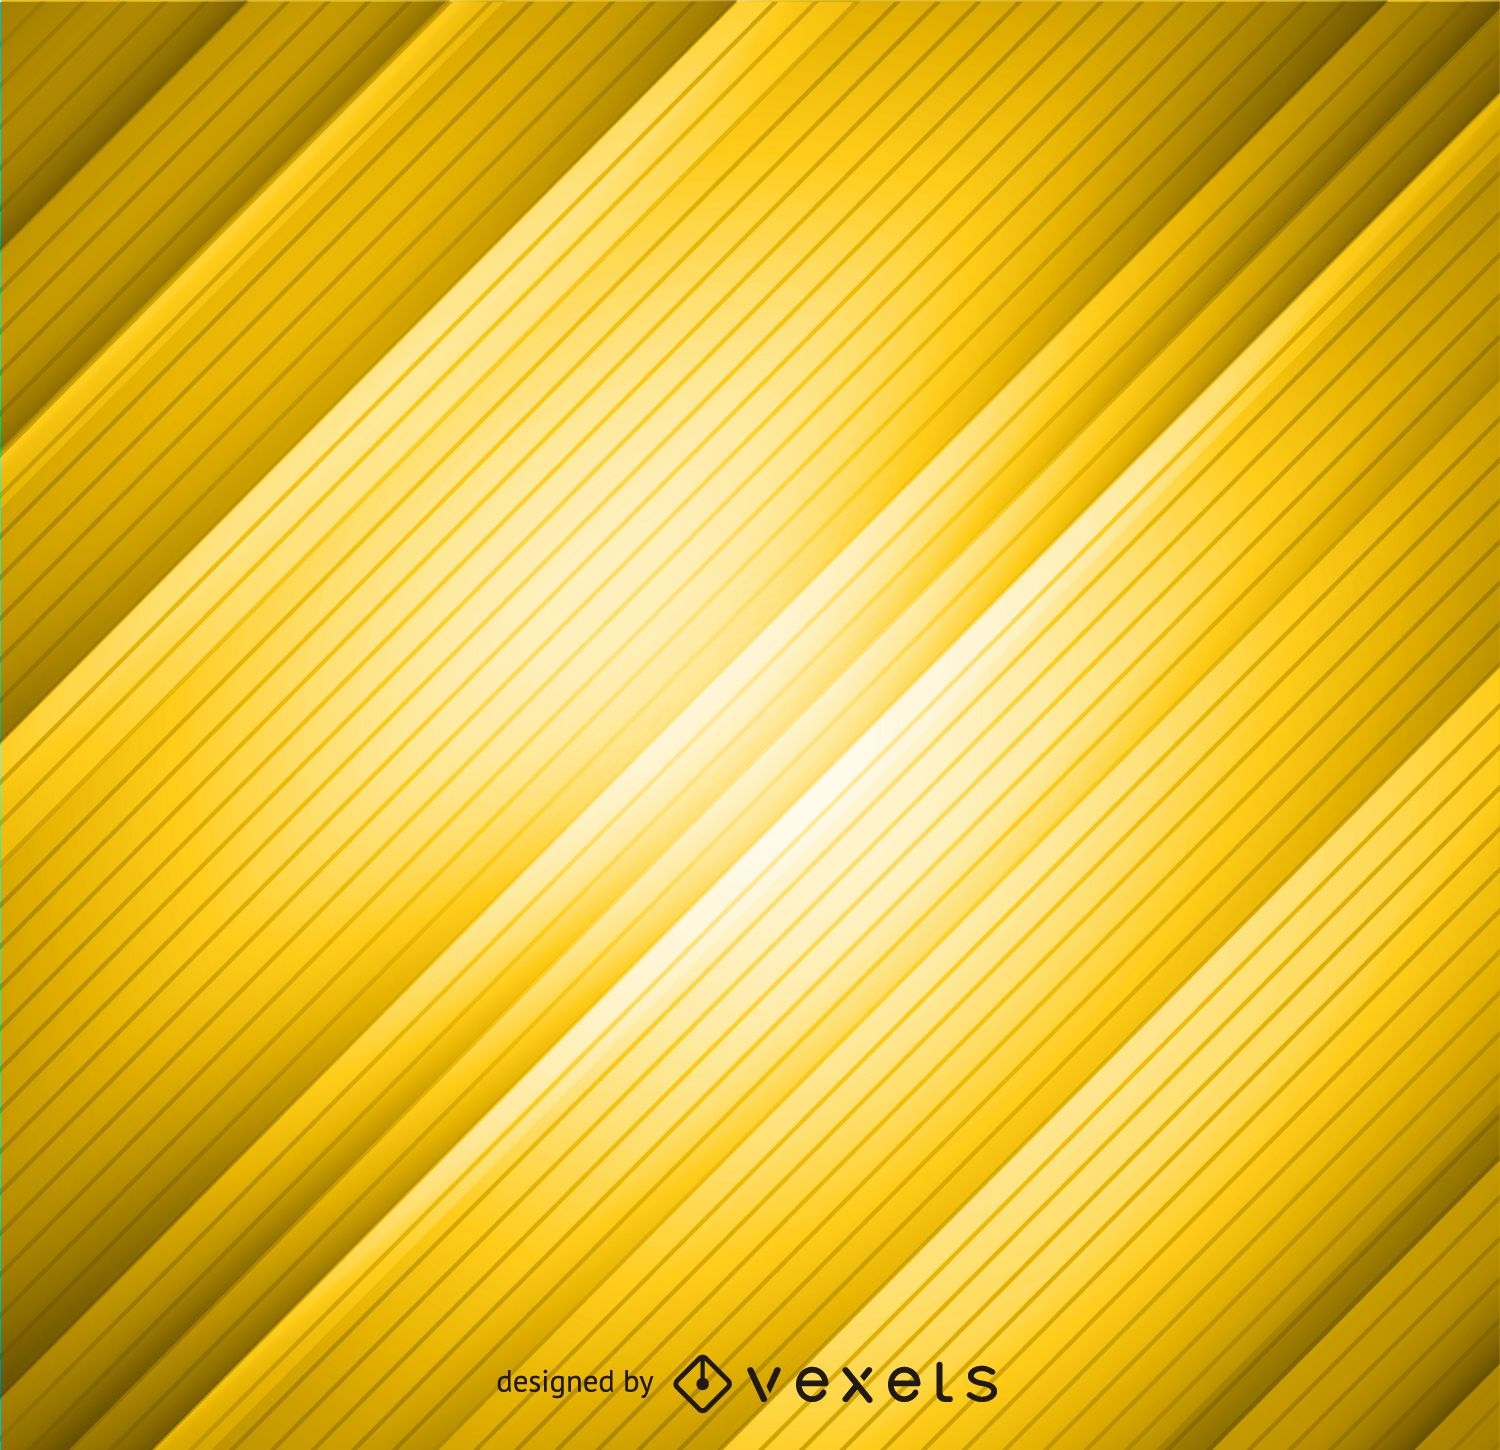 Yellow Striped Background Vector Download